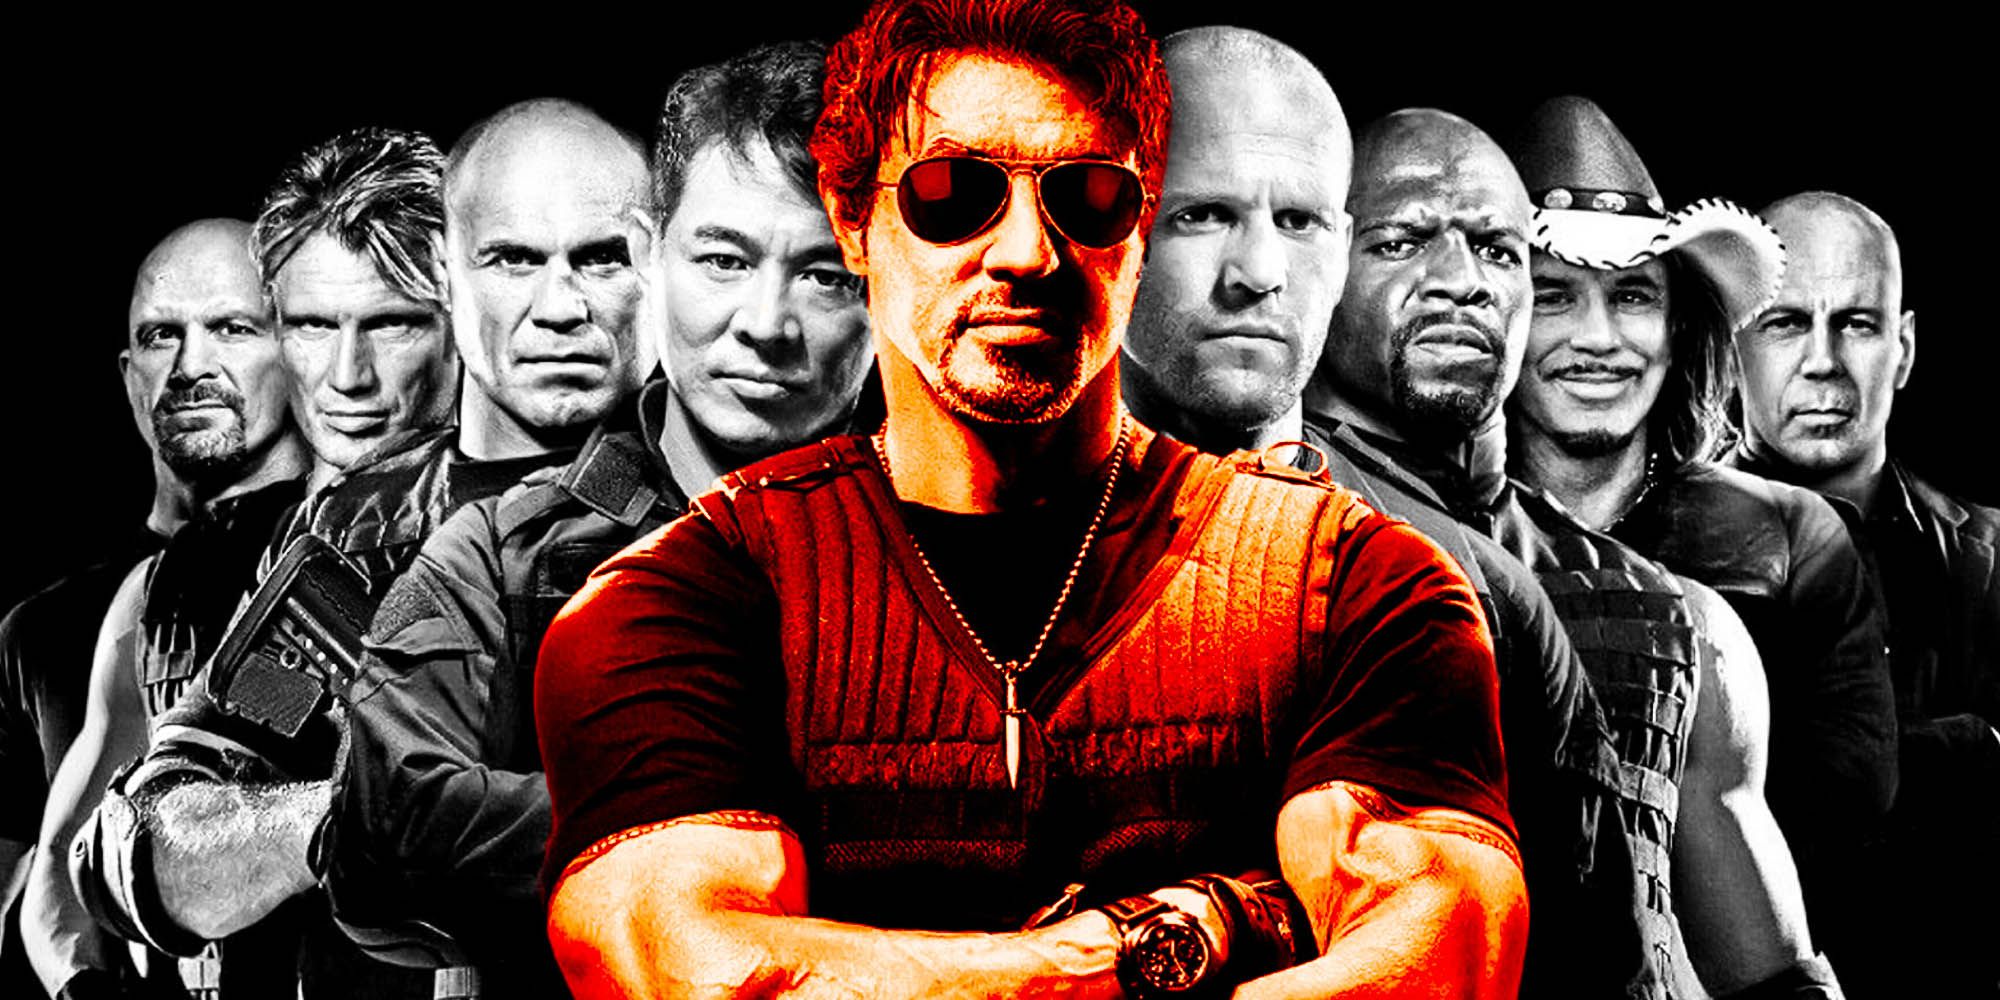 Every Sylvester Stallone Movie Franchise Ranked From Worst to Best